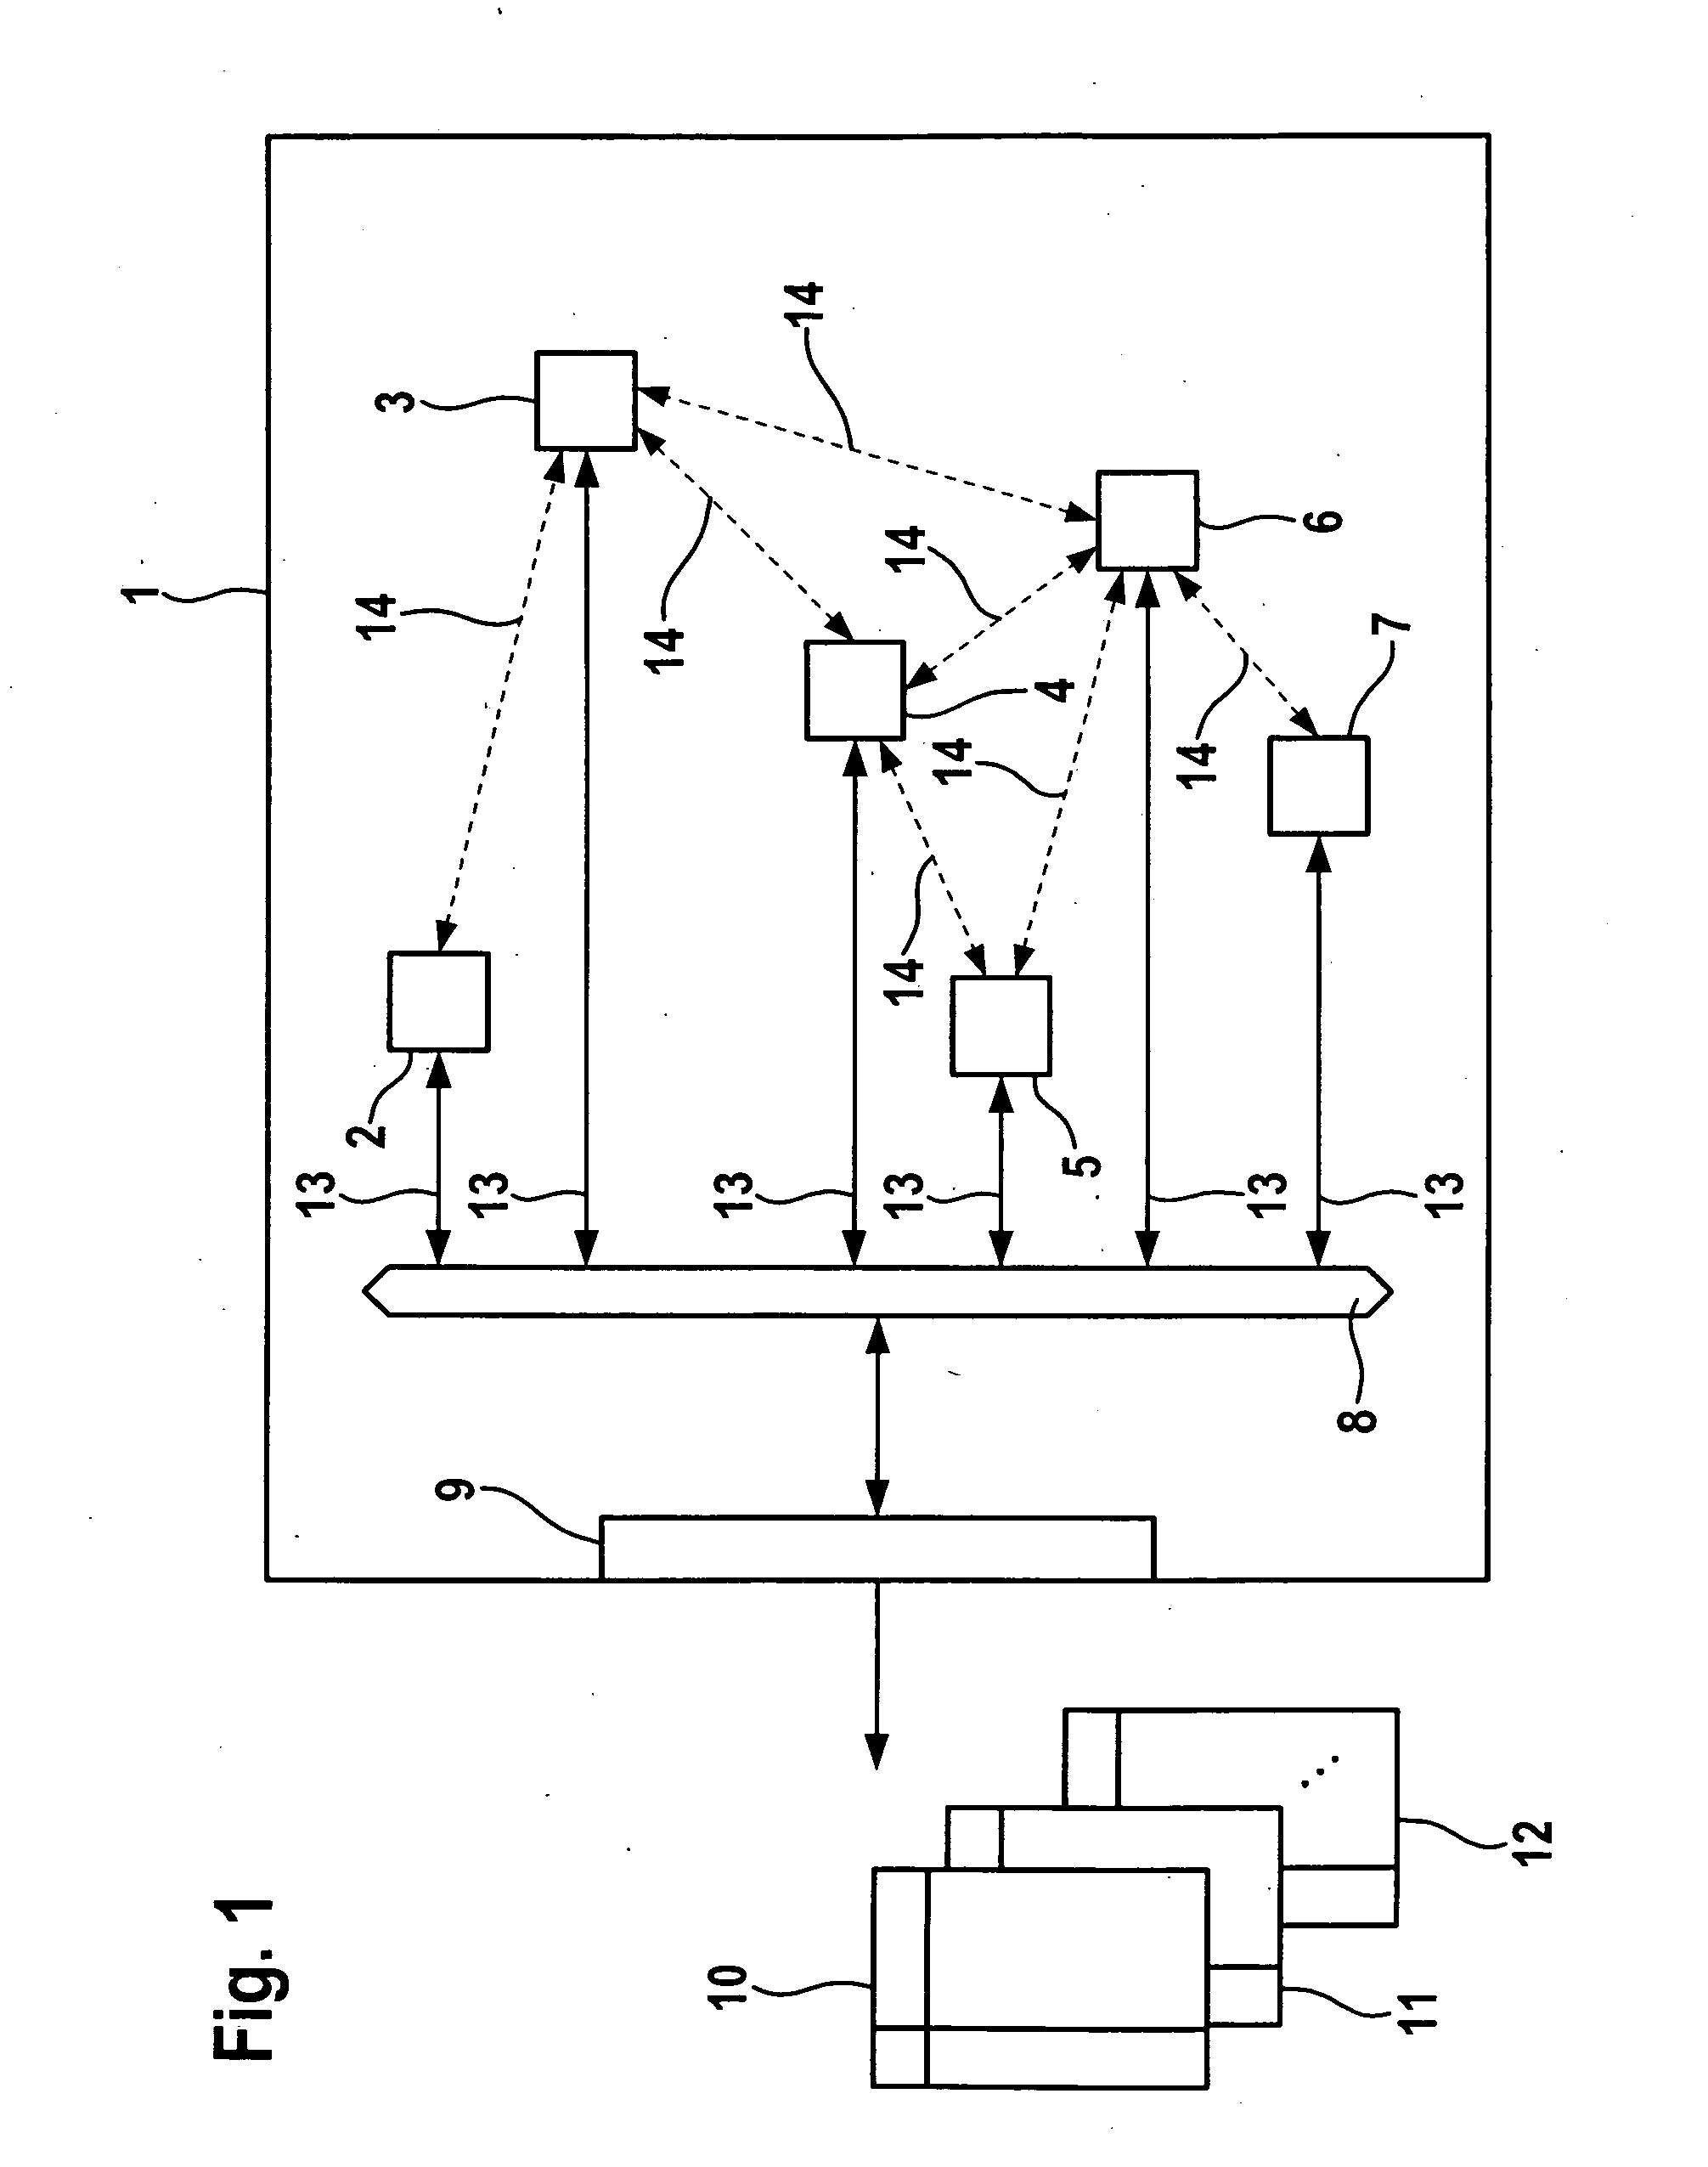 Method for determining faulty components in a system